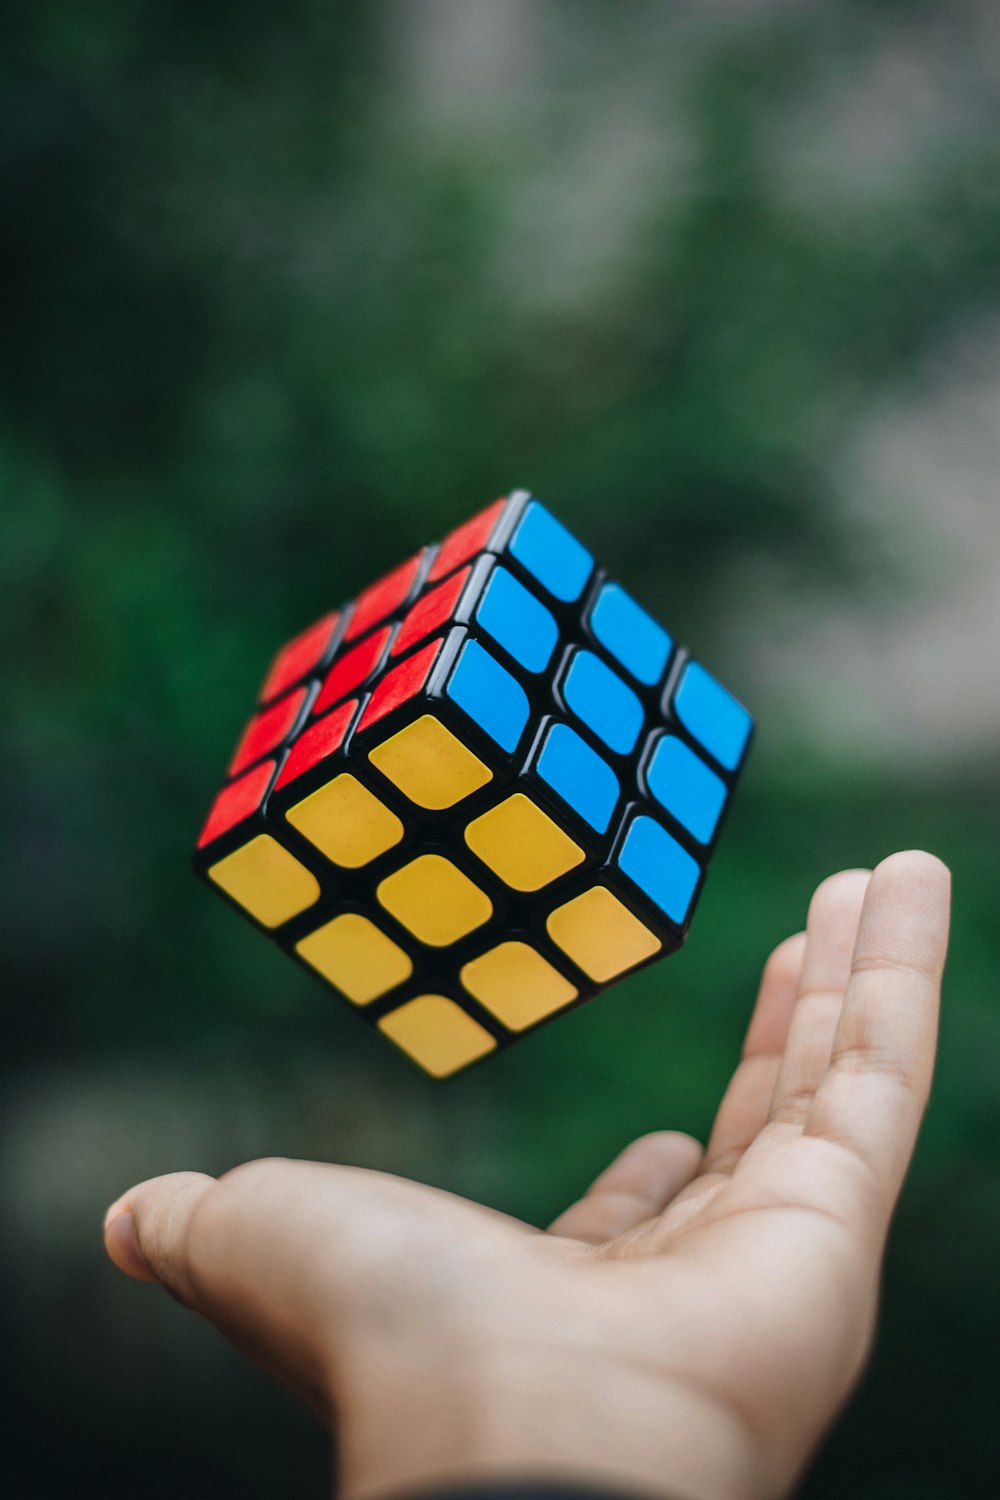 100+ Cube Pictures | Download Free Images on Unsplash